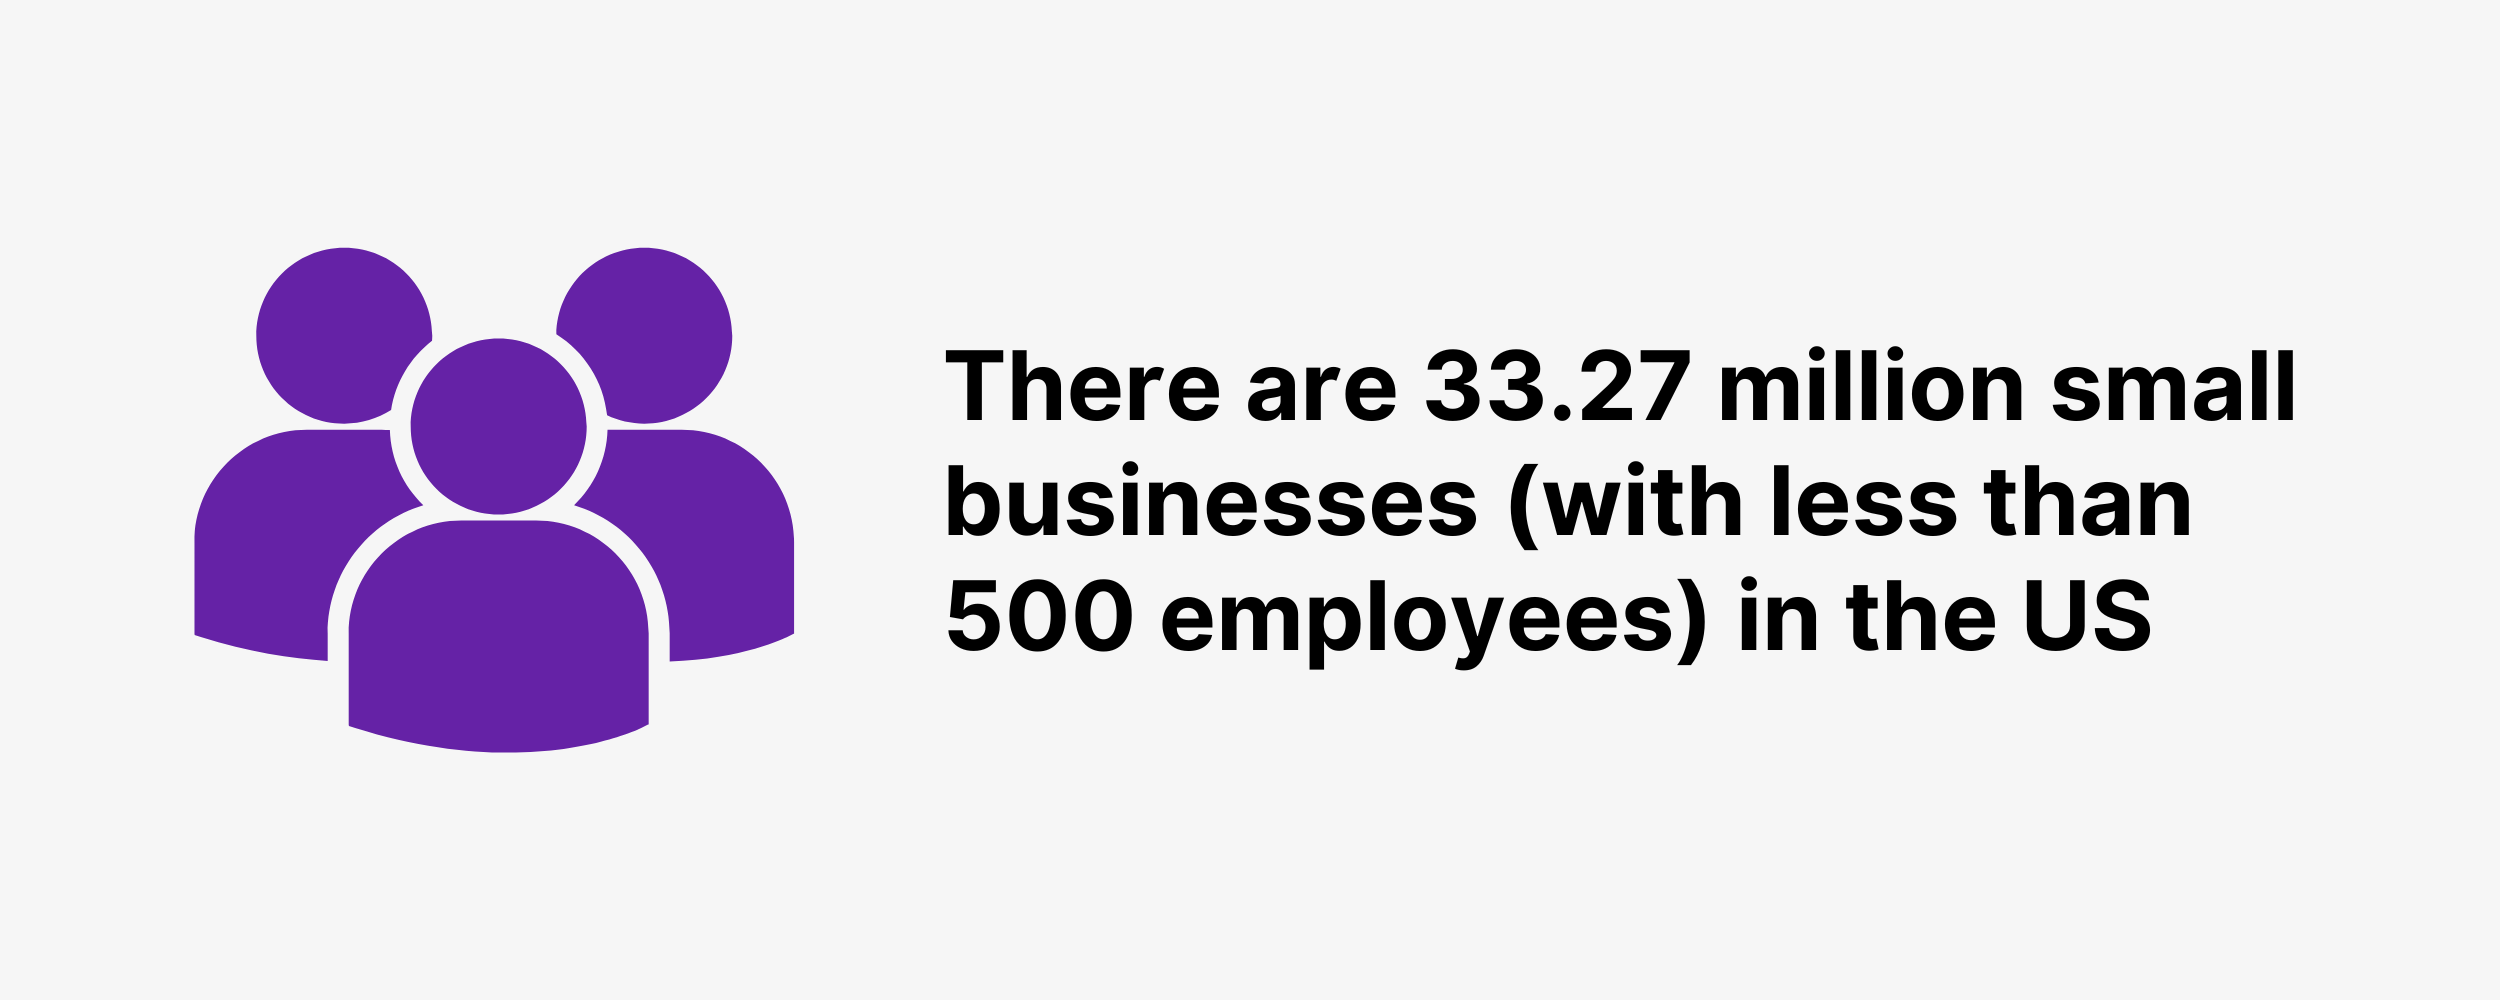 There are 33.27 million small businesses (with less than 500 employees) in the US